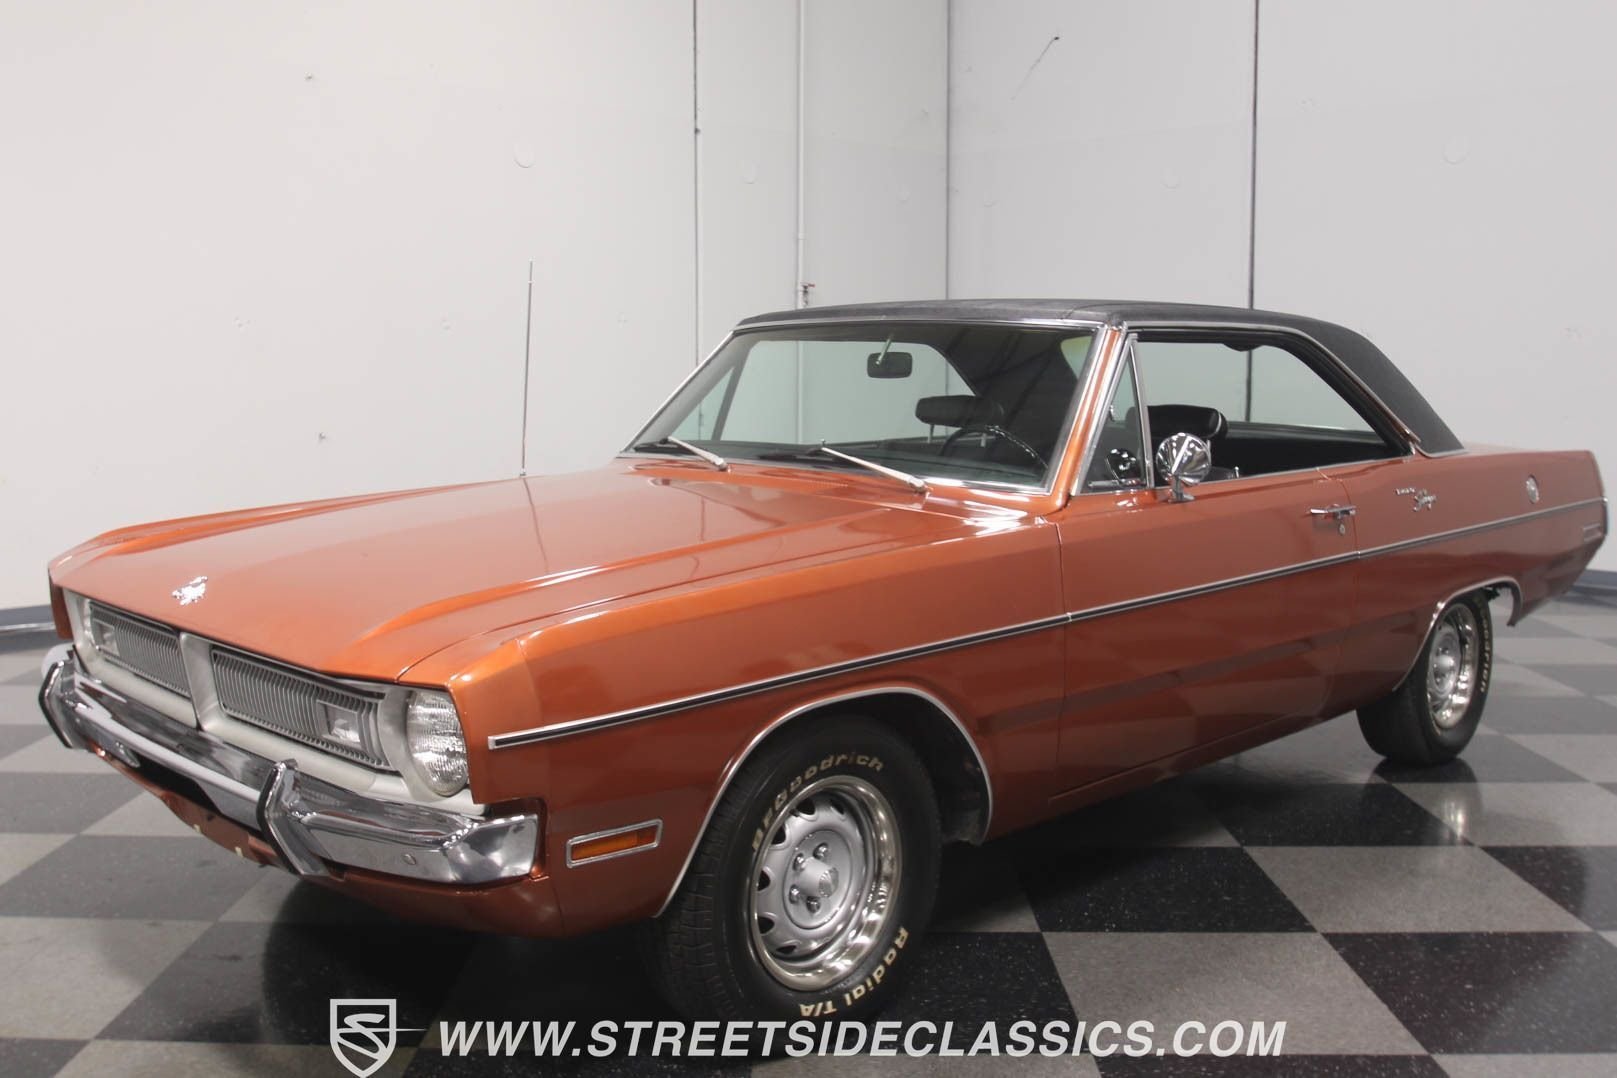 1970 Dodge Dart Classic Cars for Sale